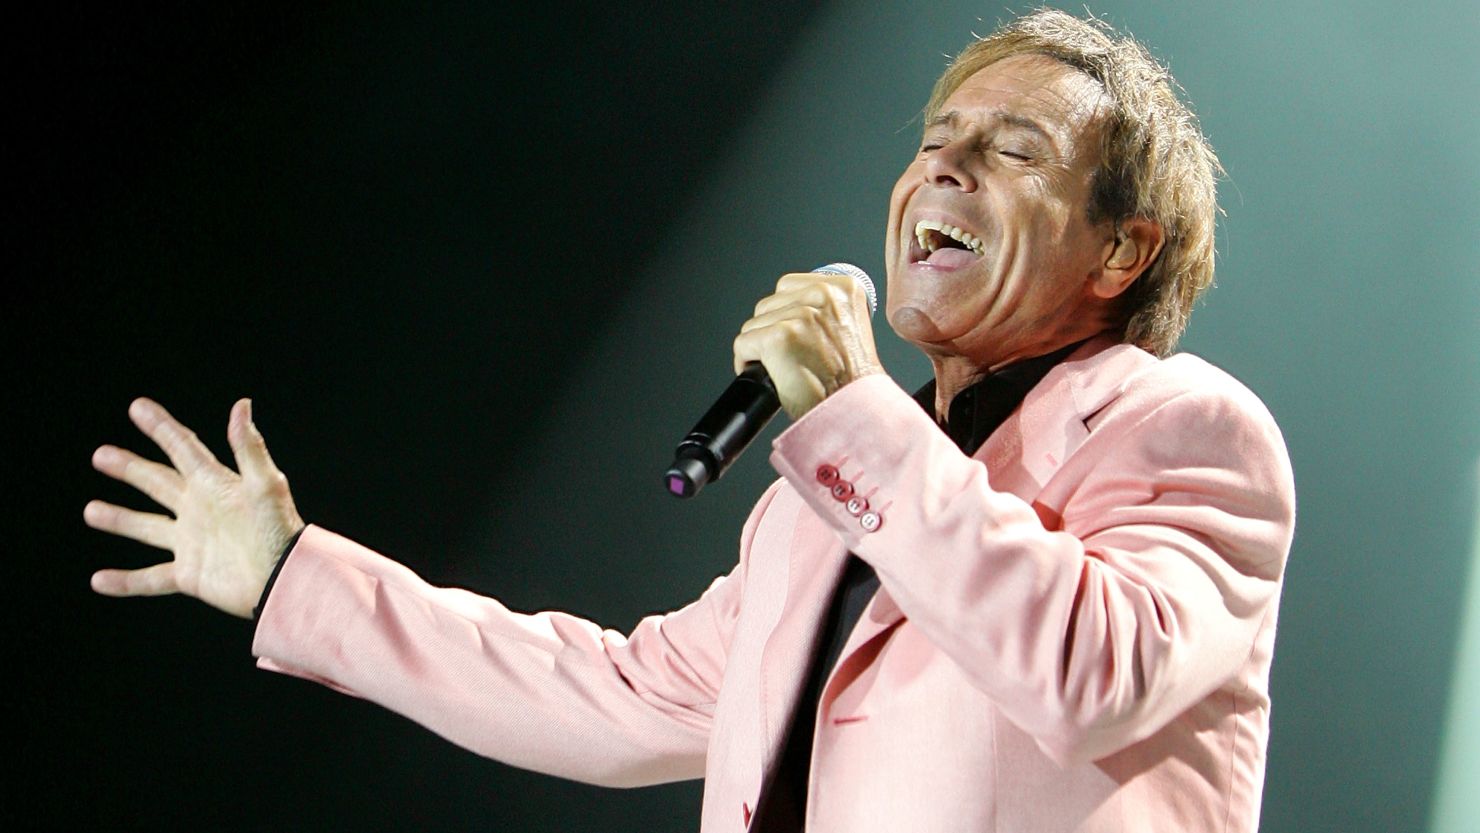 Singer Cliff Richard is suing the BBC for invasion of privacy.